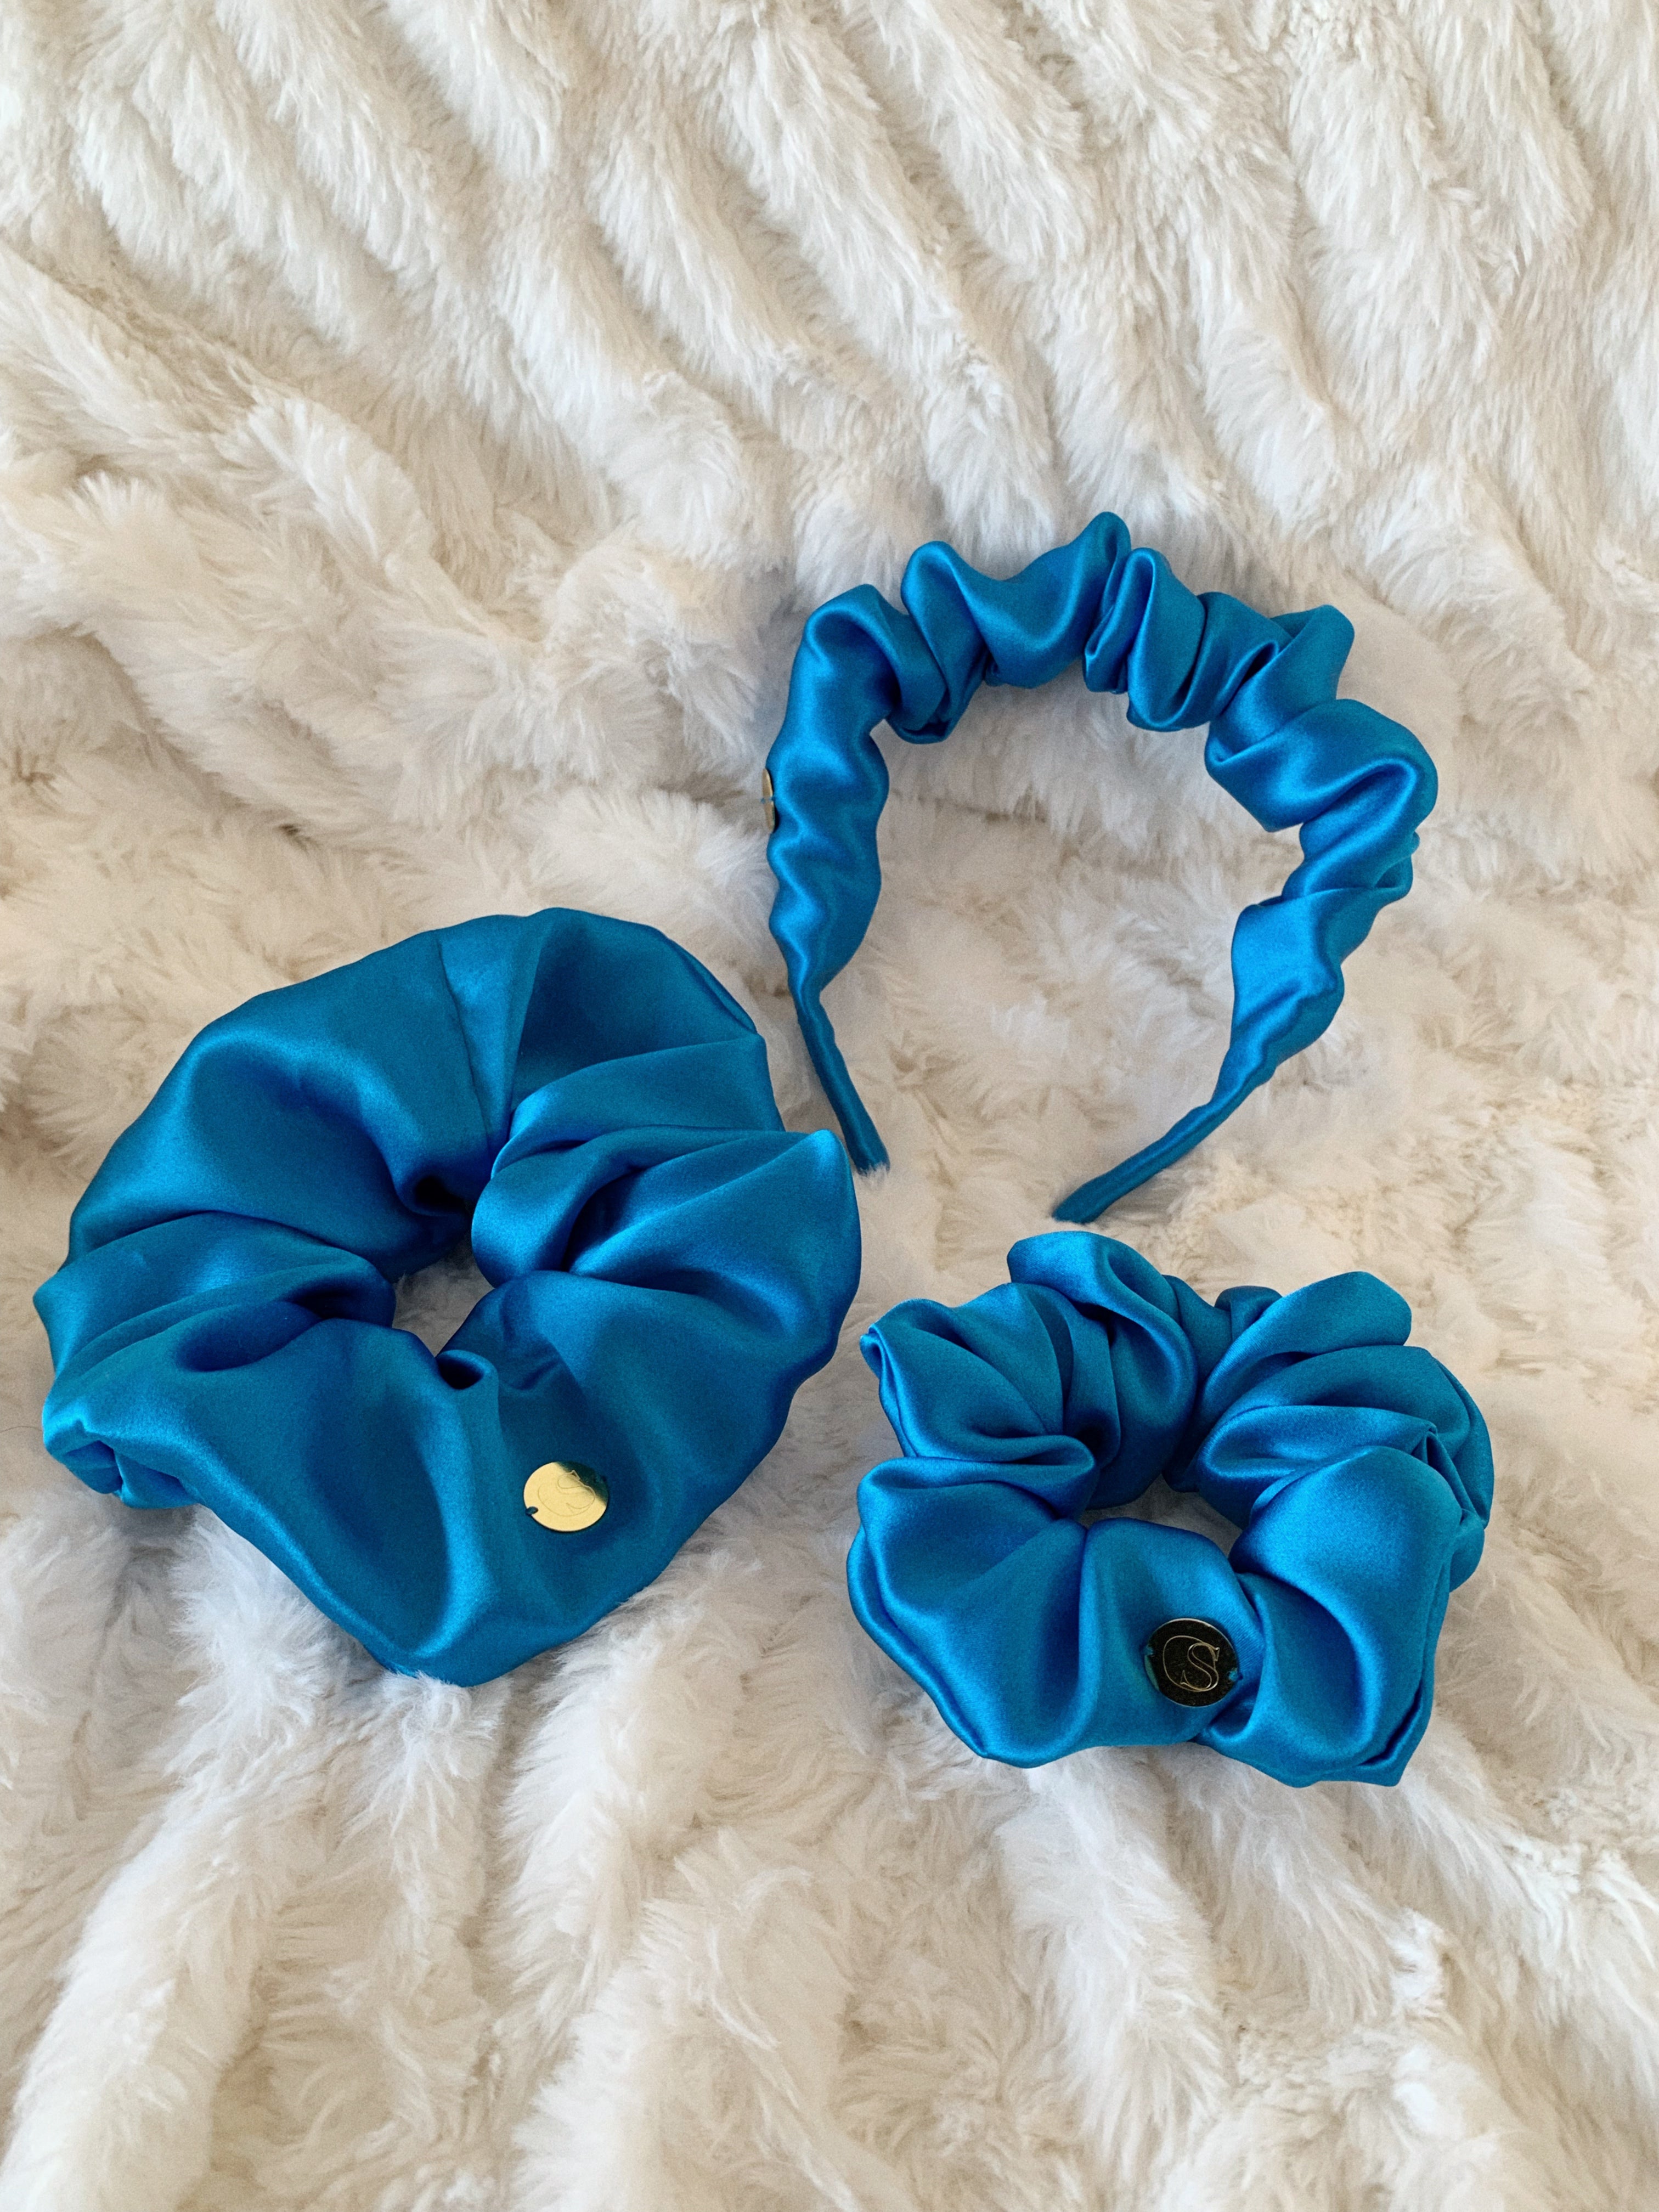 Flat lay of one standard size scrunchie, one jumbo size scrunchie and one scrunchie headband in blue.